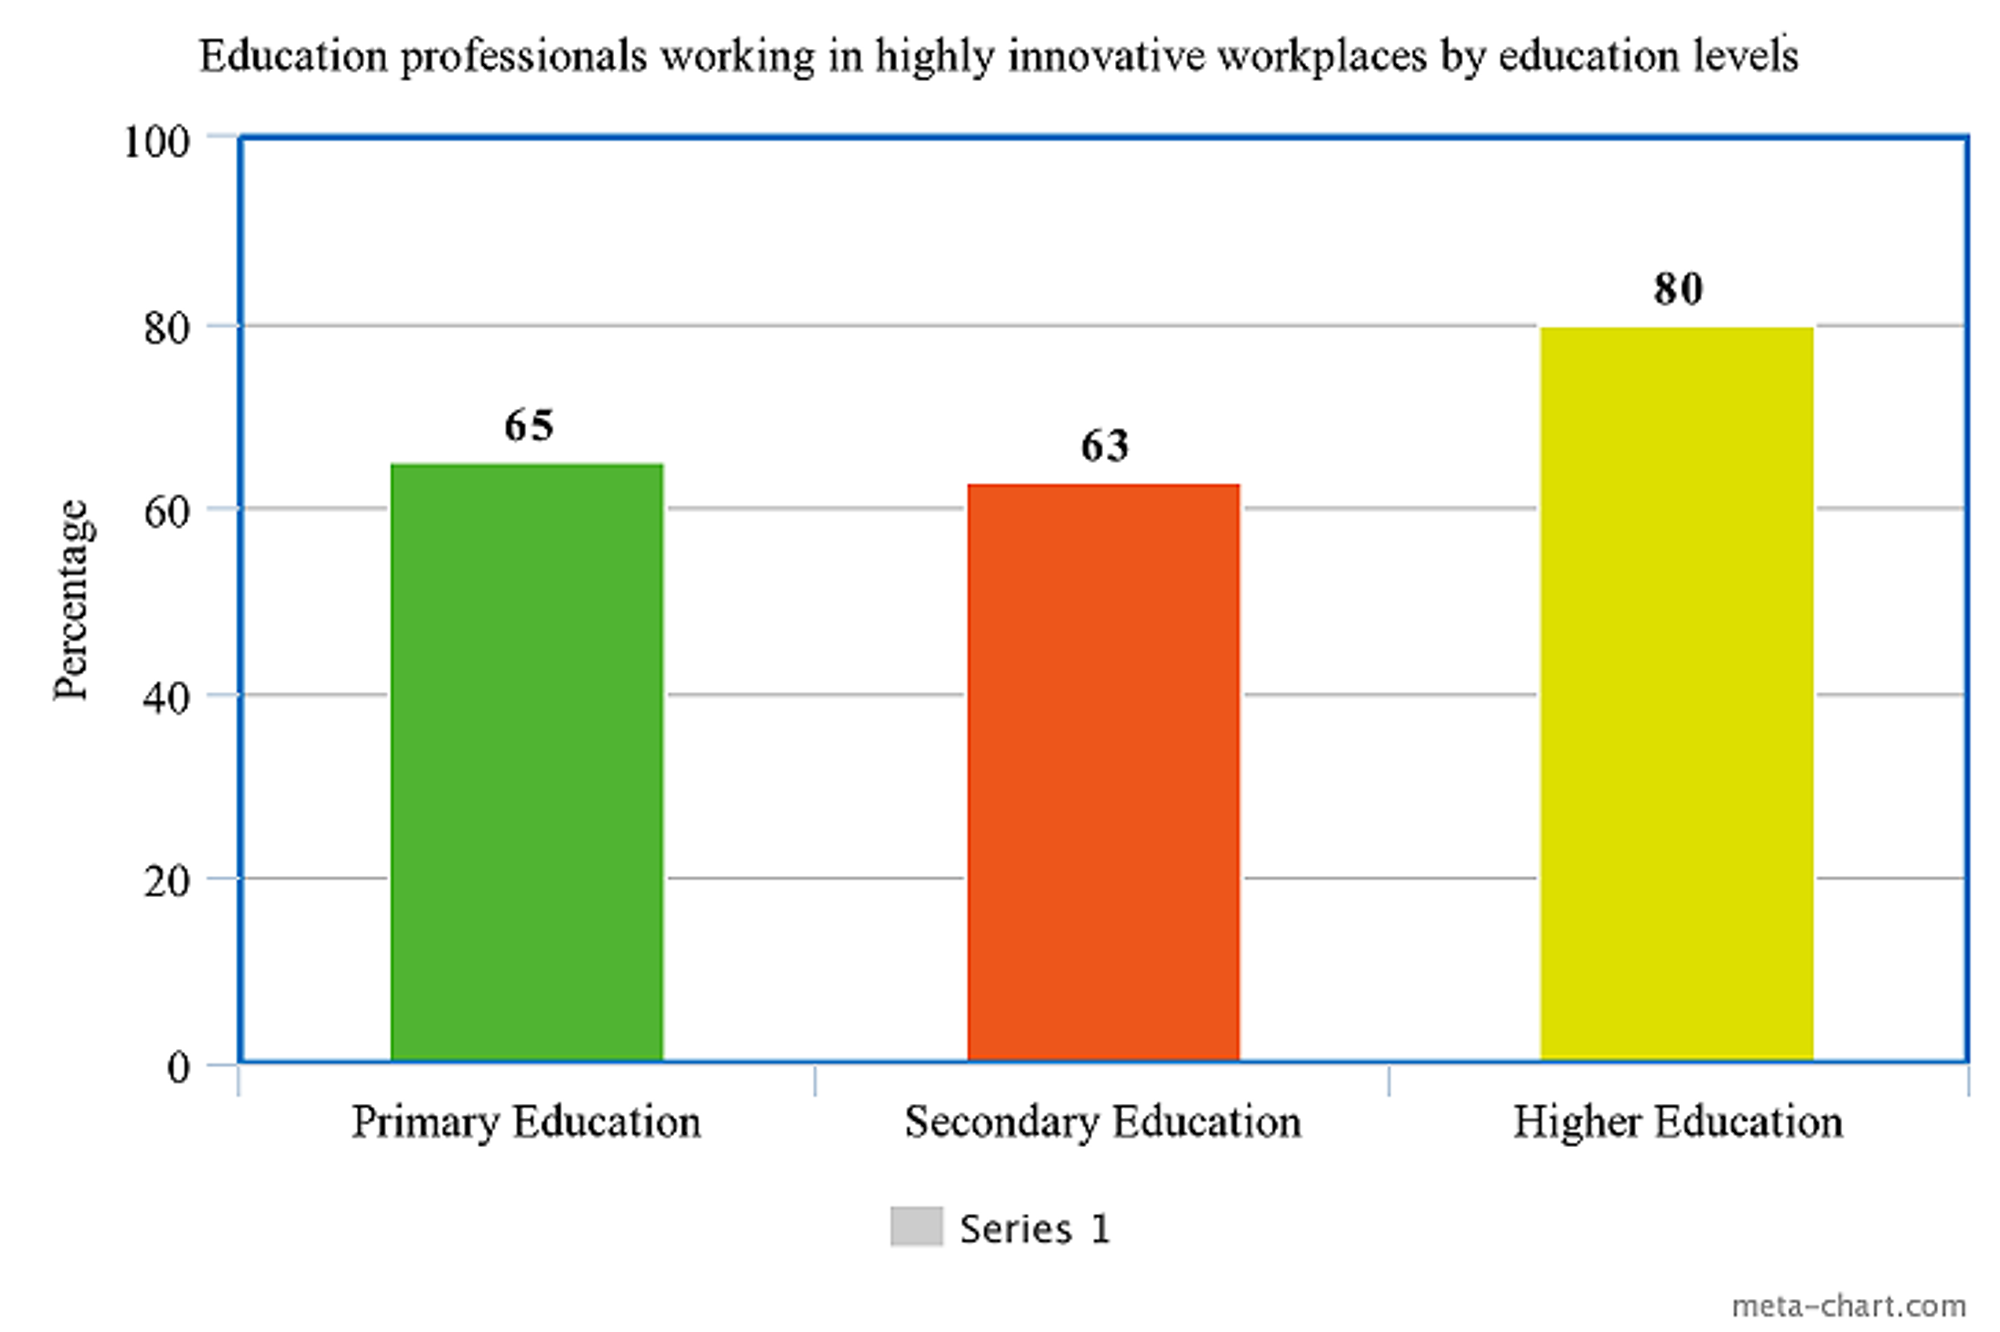 education-professionals-working-in-highly-innovative-workplaces-by-education-level